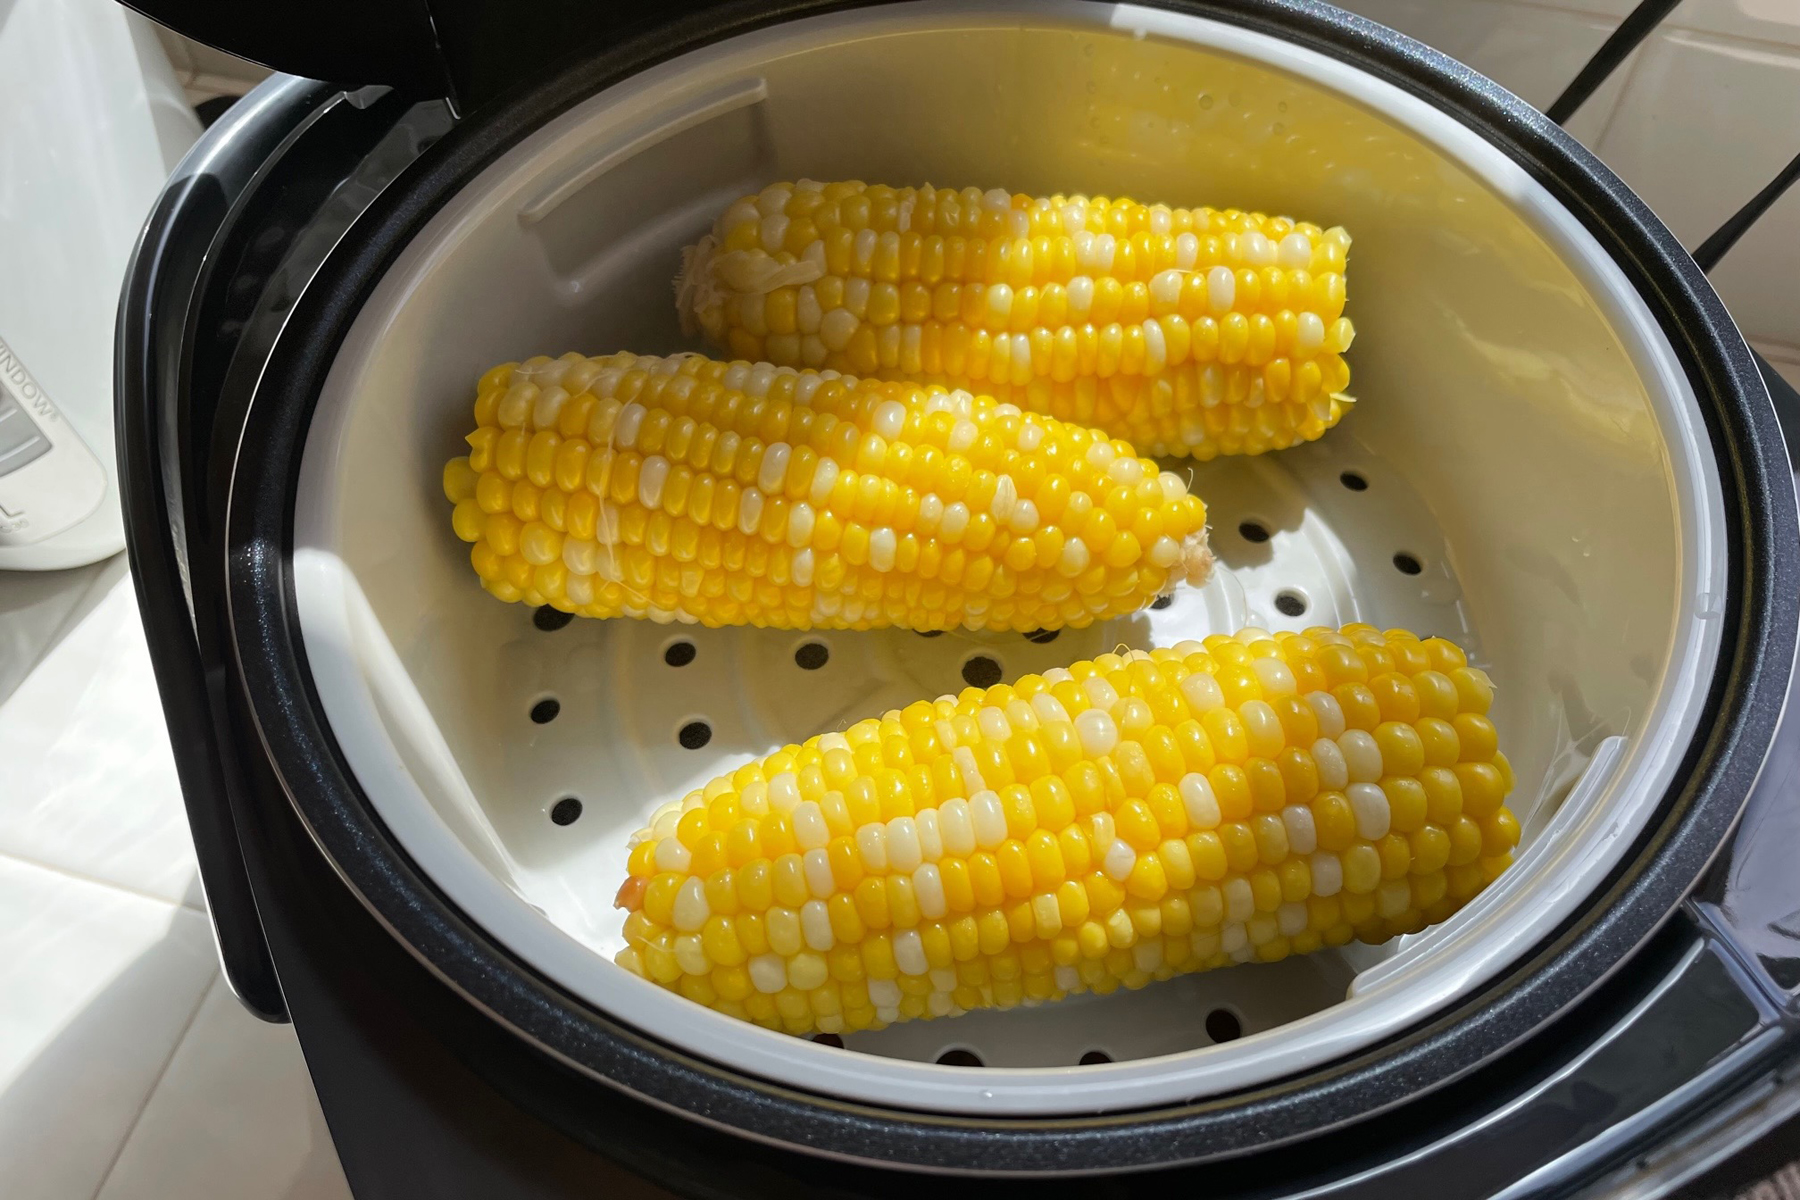 Steaming basket with delicious corn